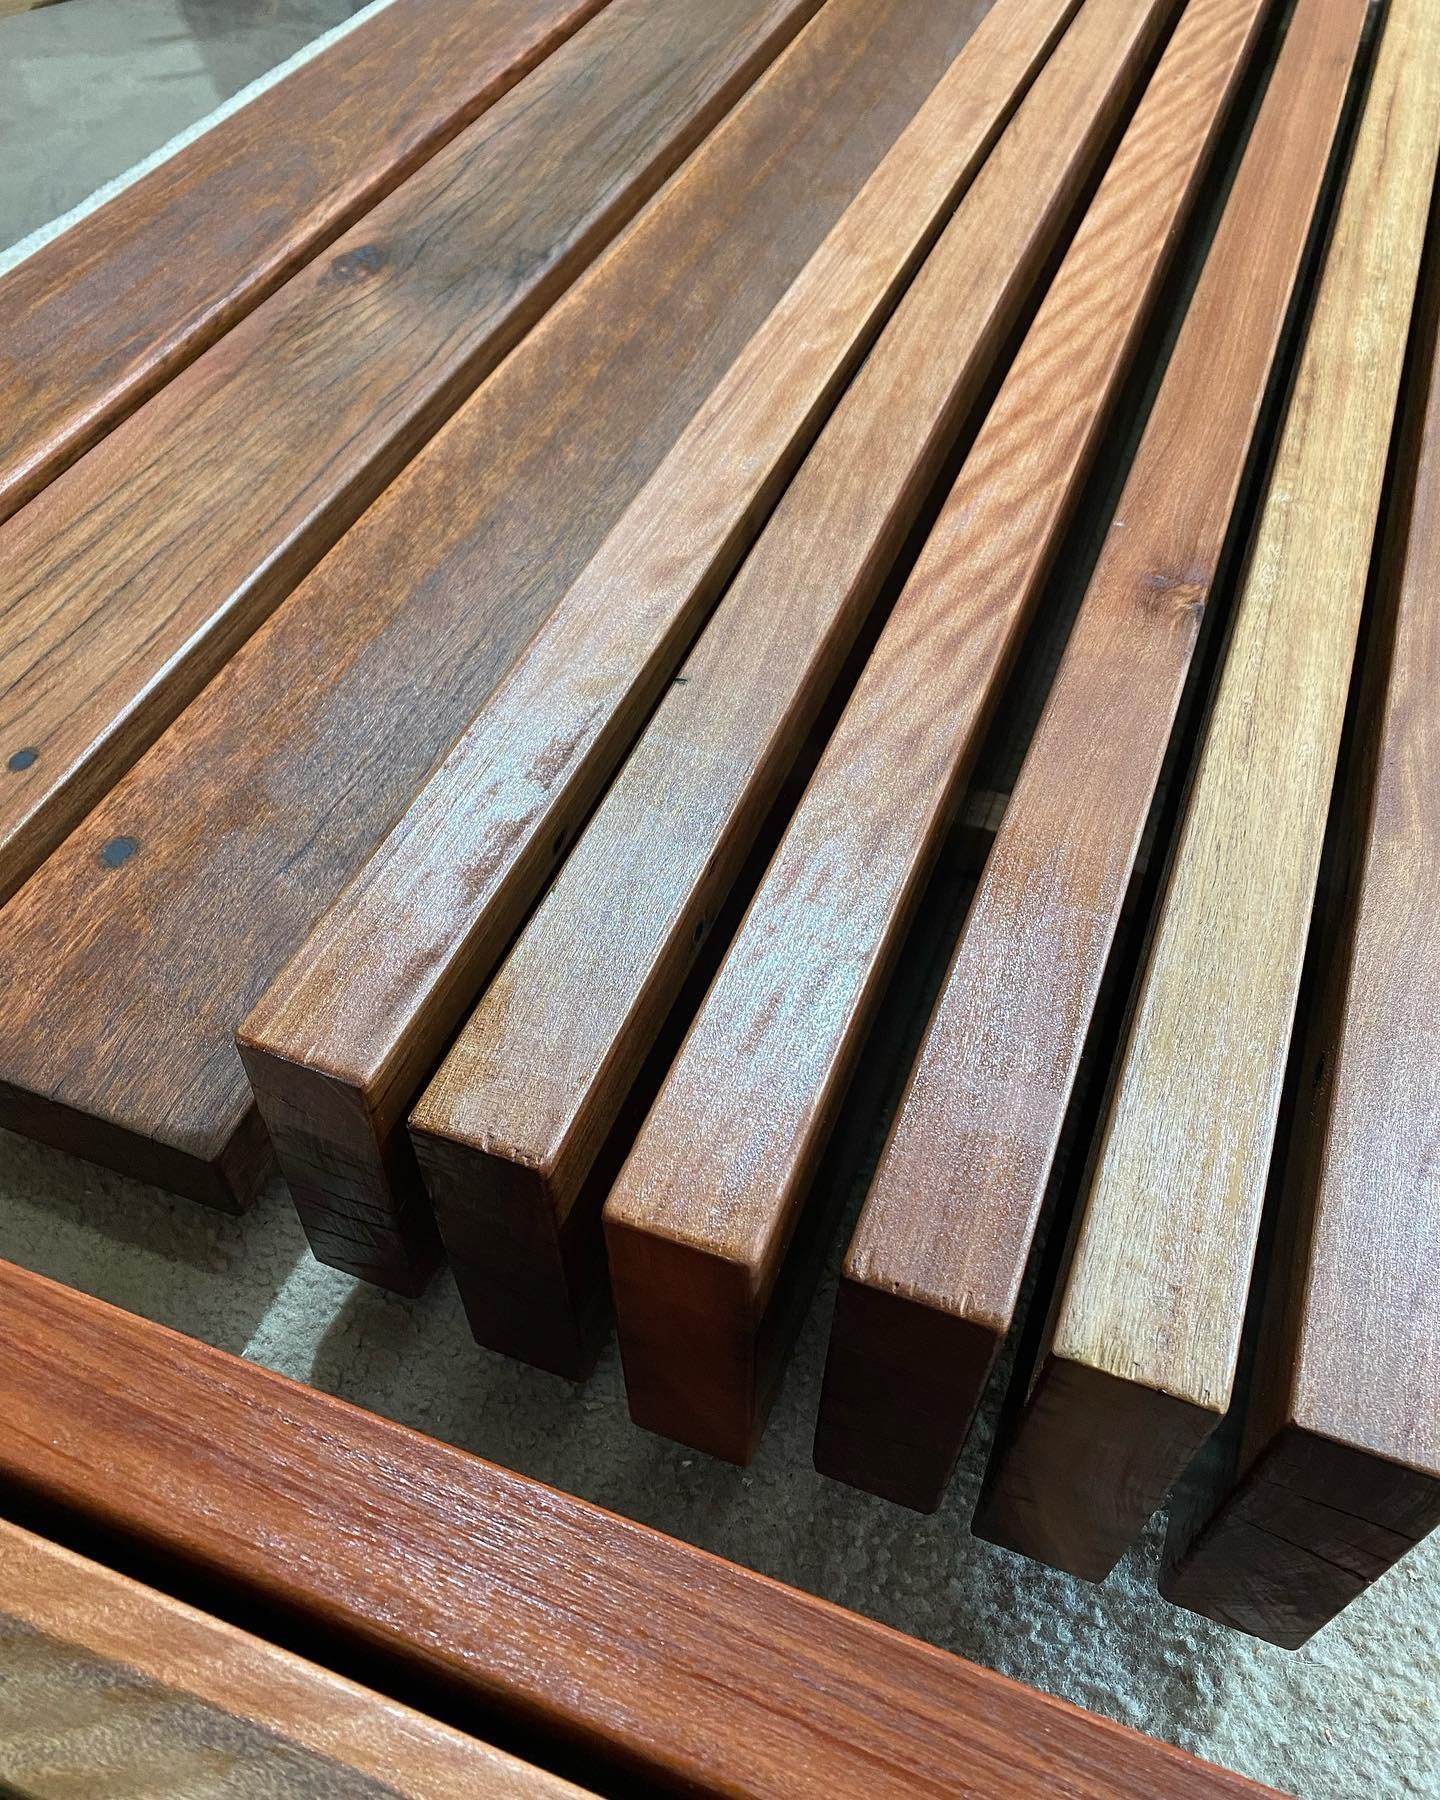 Timber salvaged from a local boat ramp prepped and ready to be assembled into an outdoor table. 👍⚒️🌳 @fiddesaustralia